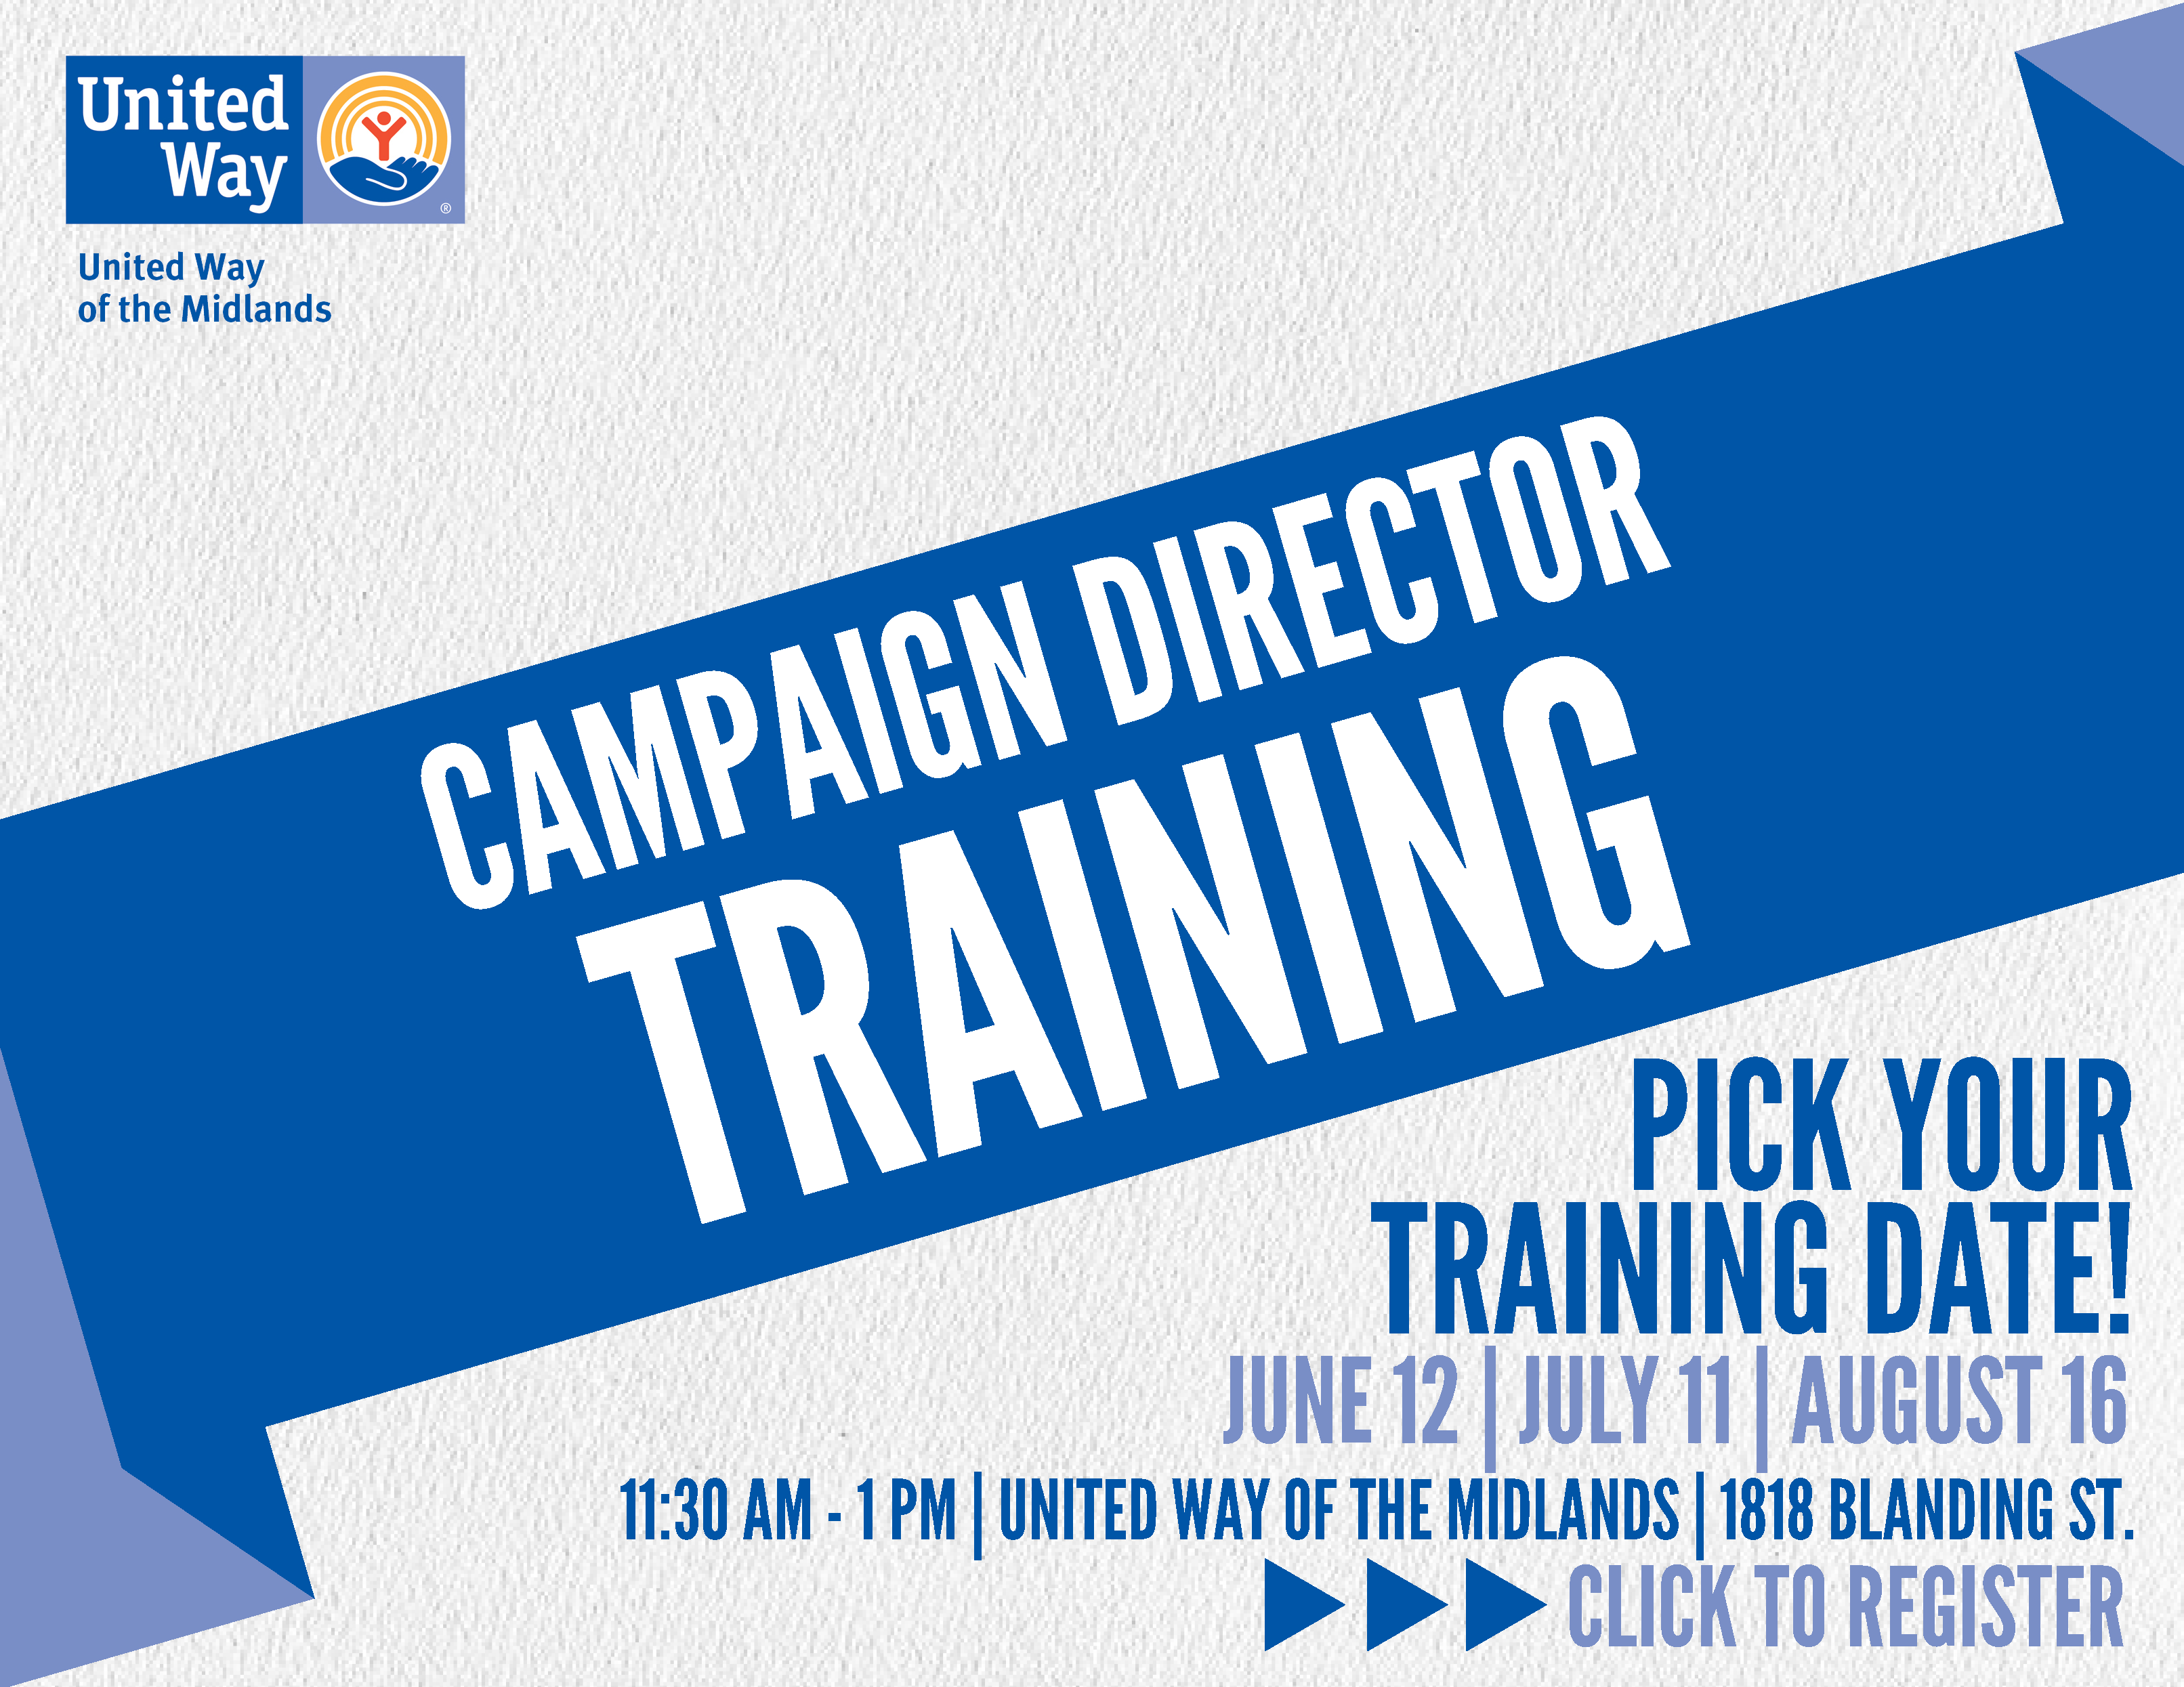 Campaign Director Training